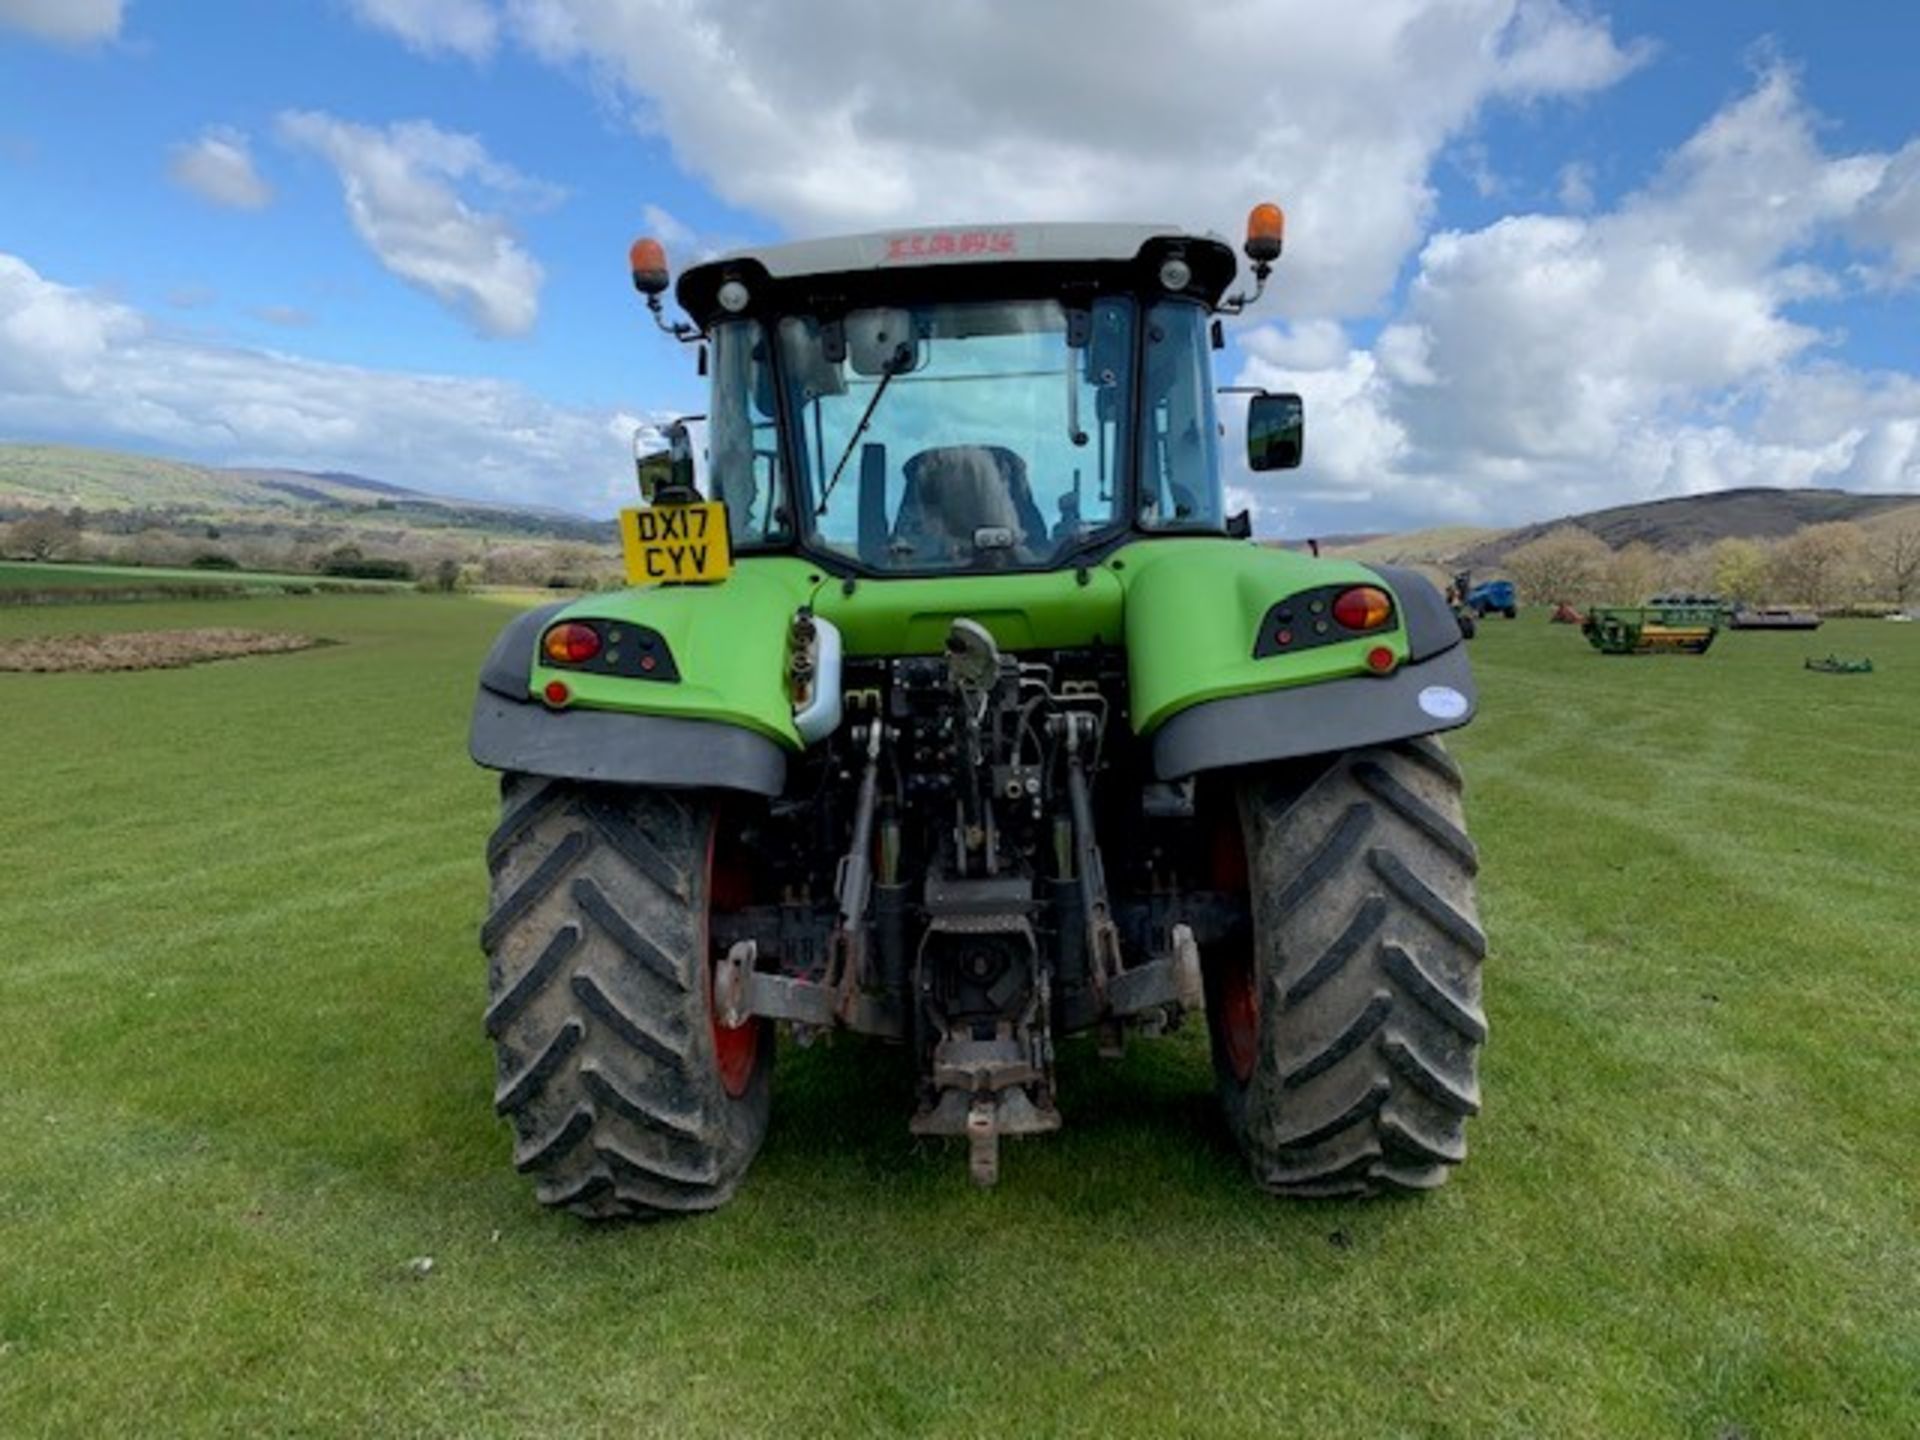 CLAAS ARION 440 4WD TRACTOR. REG.NO. DX17 CYV FIRST REG 1/4/17 125HP PANORAMIC ROOF APPROX 1800 HRS - Image 3 of 7